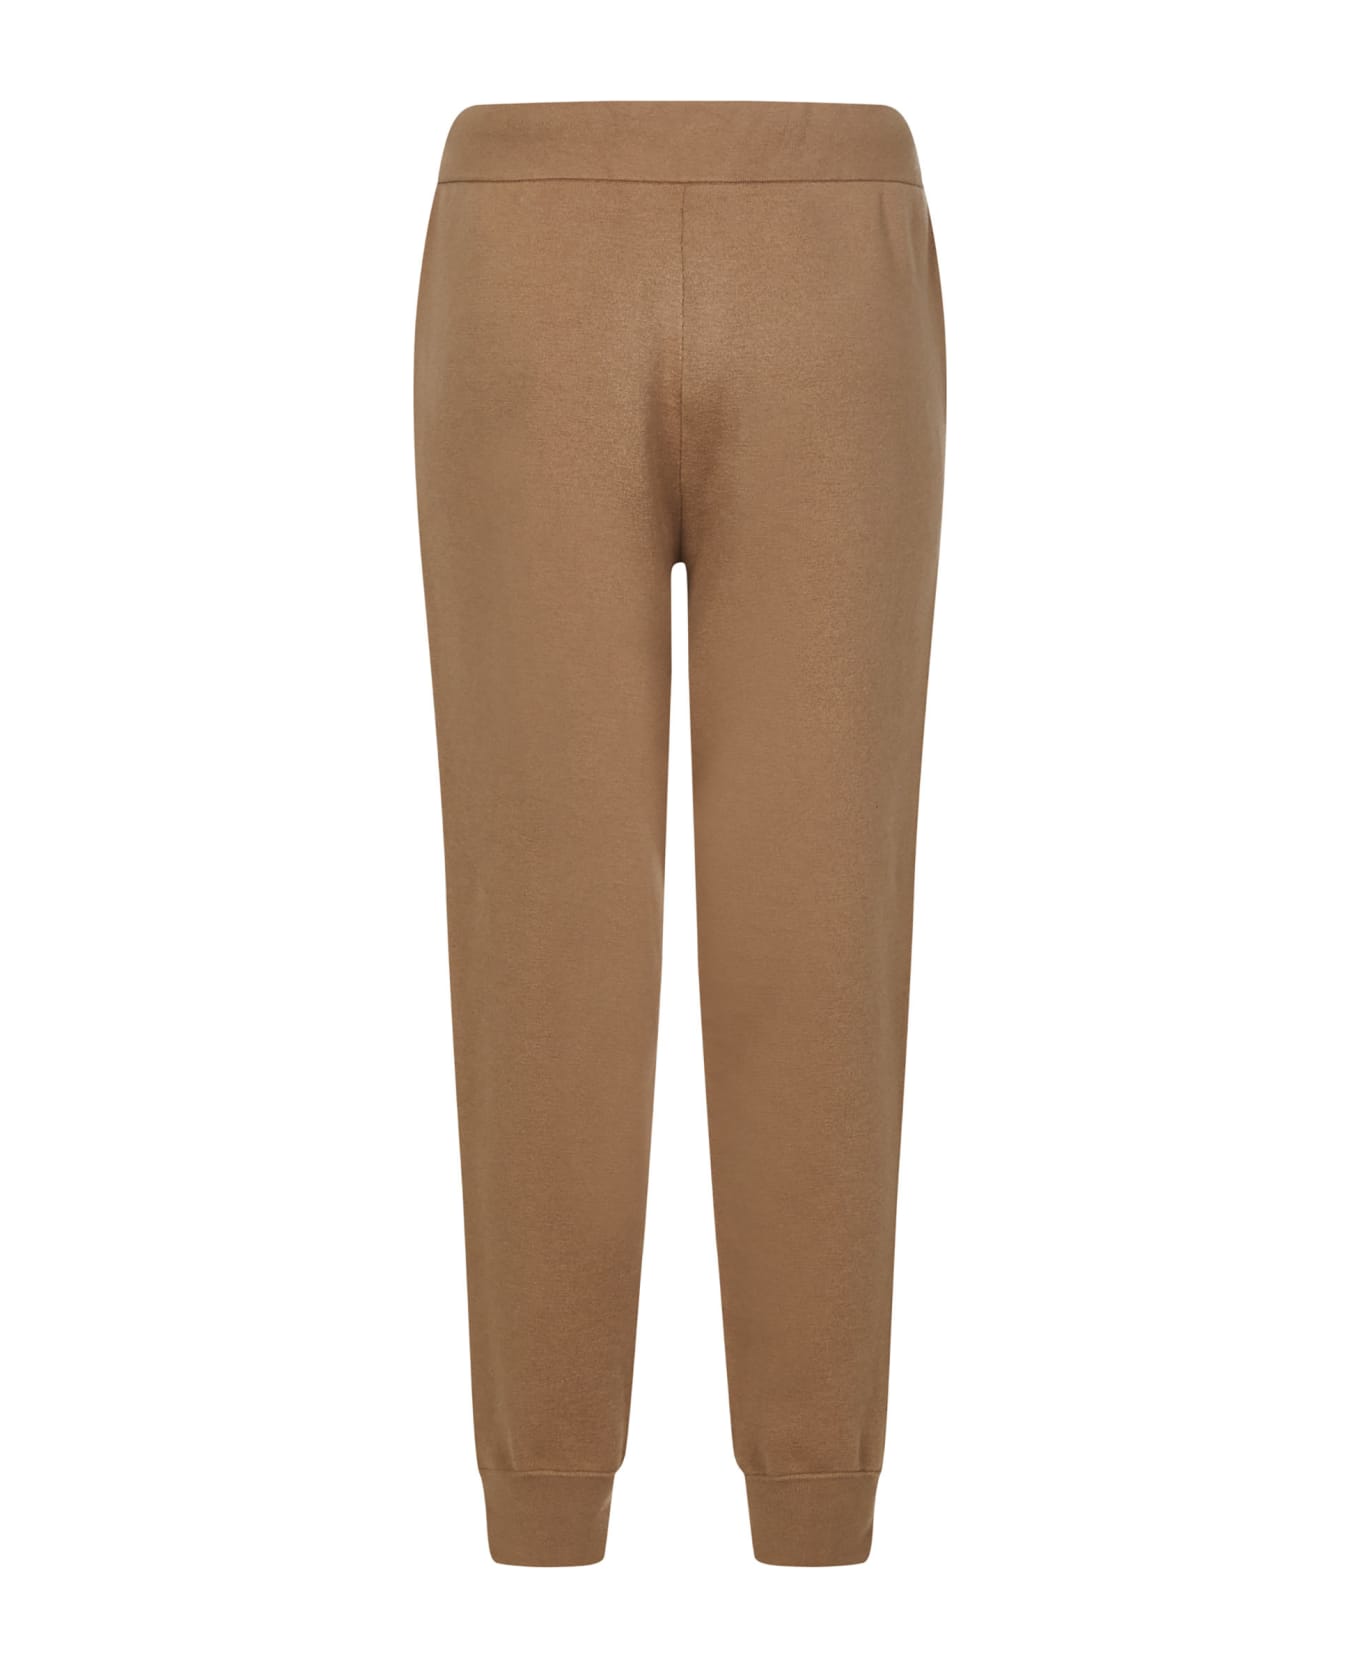 Burberry fit Trousers - Brown